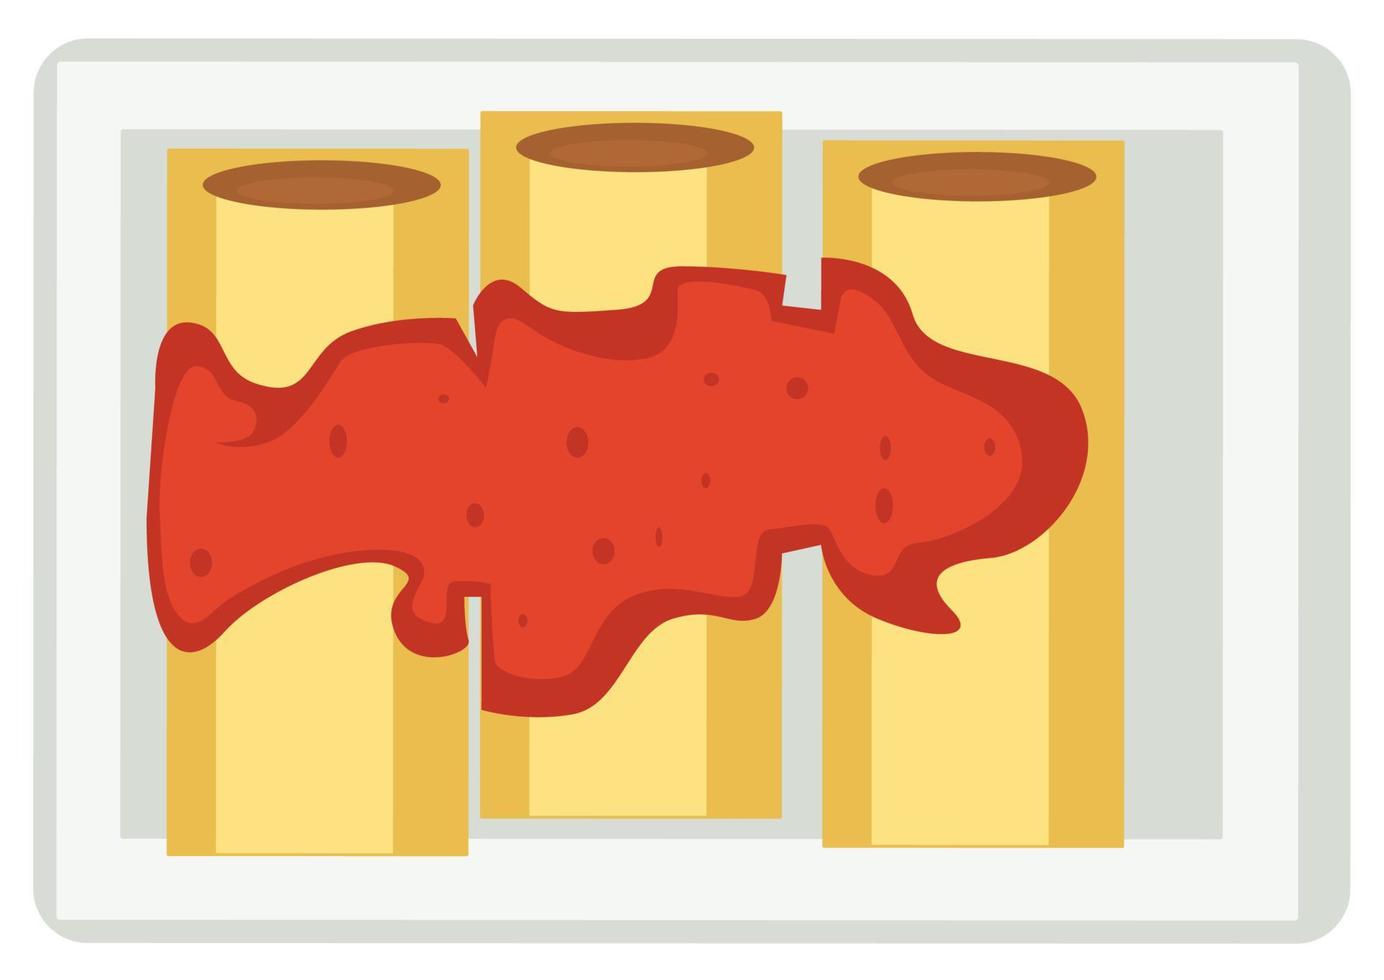 Pancake rolls with sweet jam or caviar on top vector